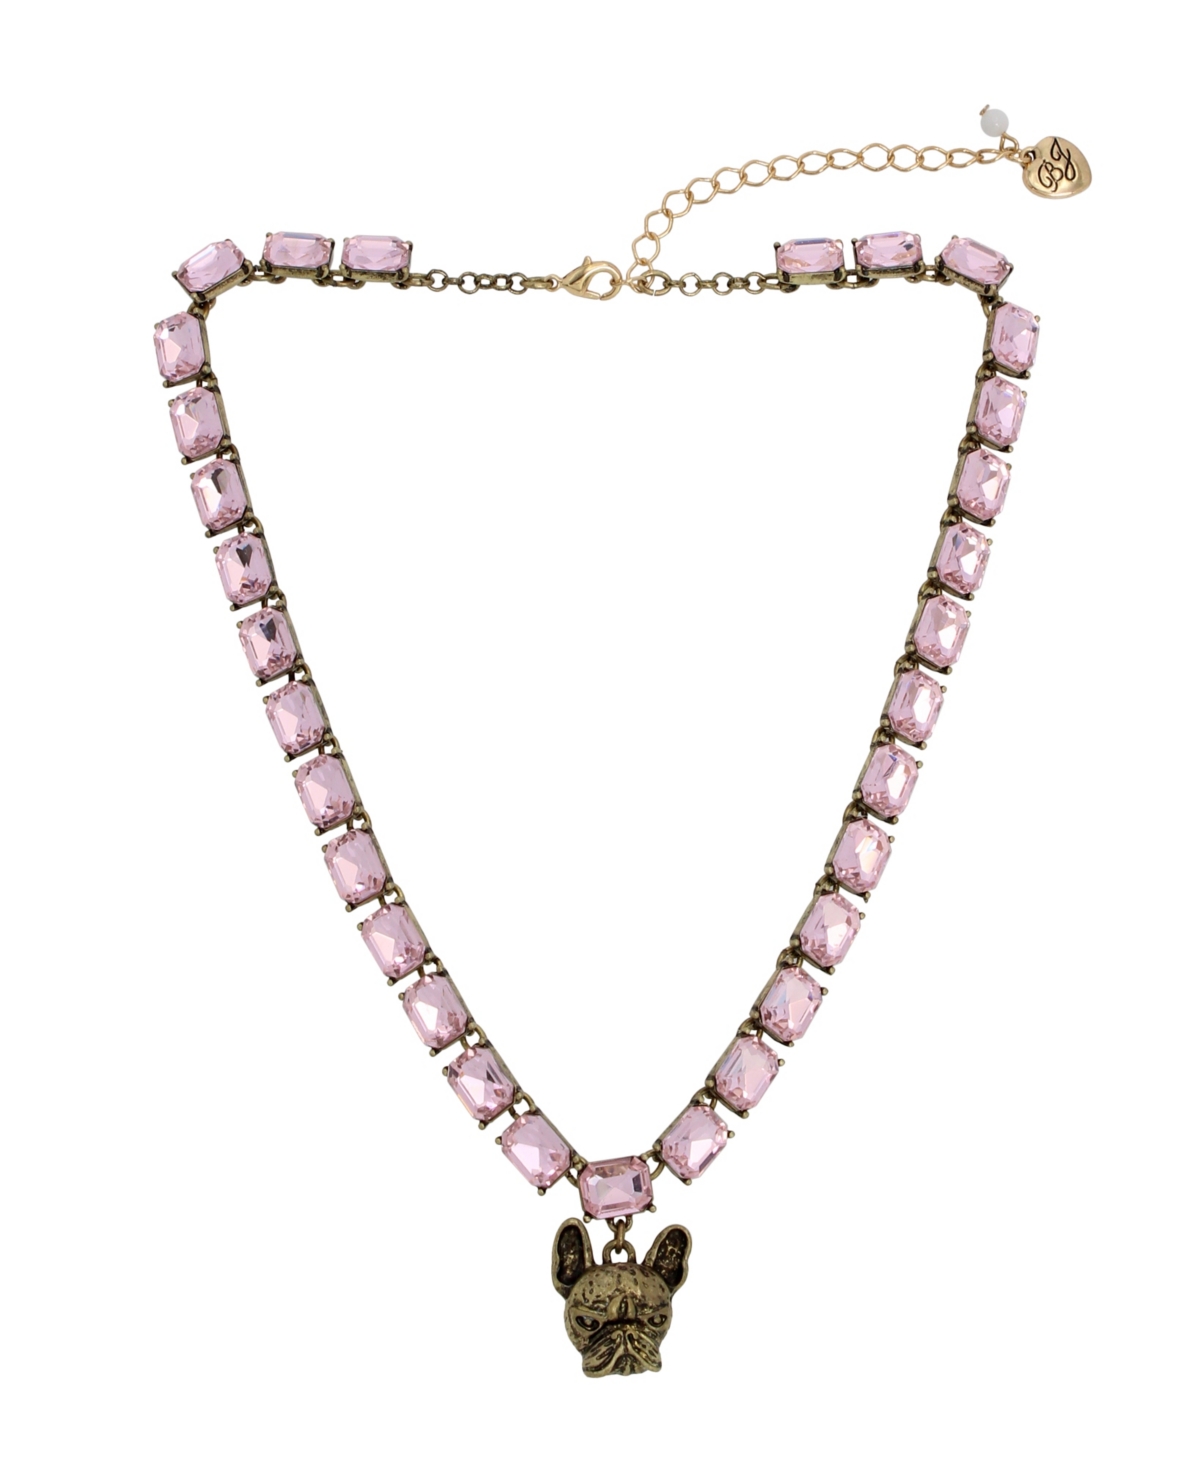 Faux Stone Frenchie Pendant Tennis Necklace - Pink, Gold